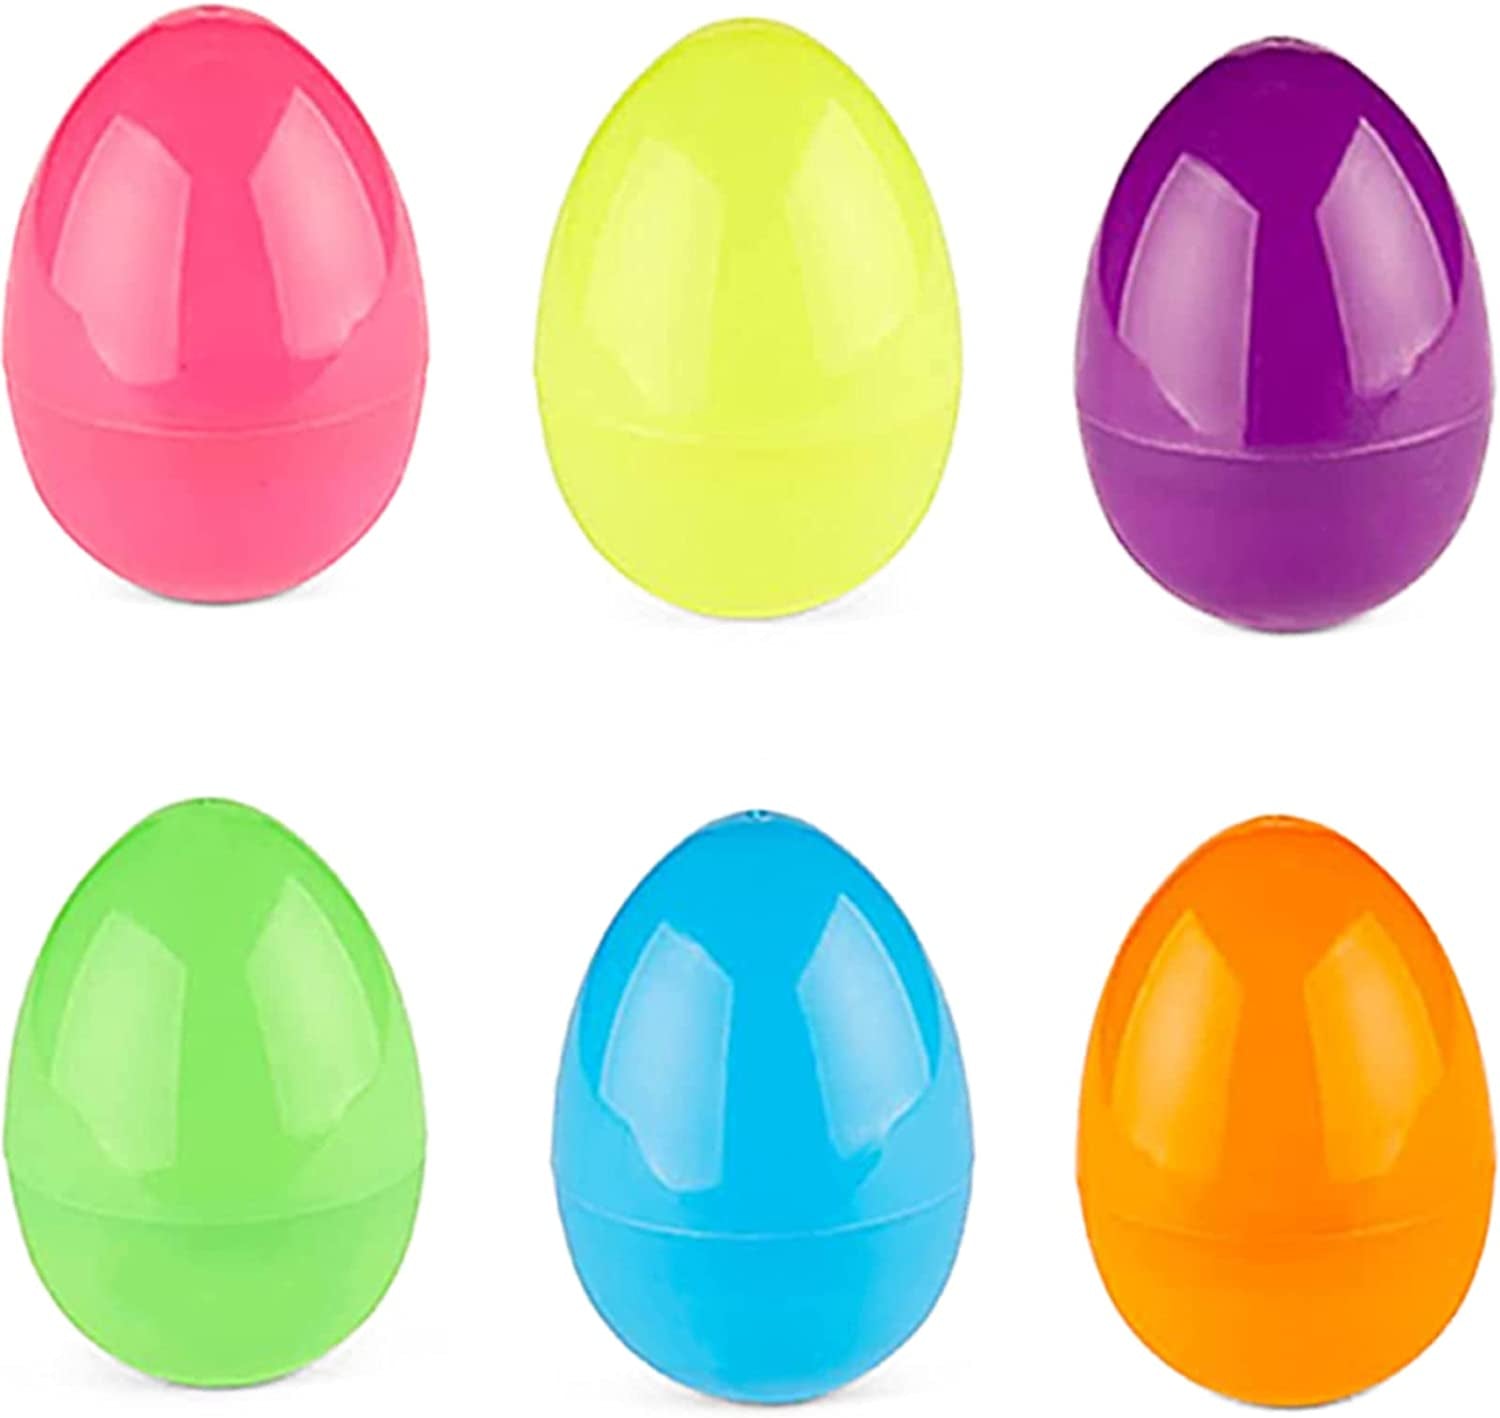  Fillable Colorful Plastic Easter Eggs 48 Pack 